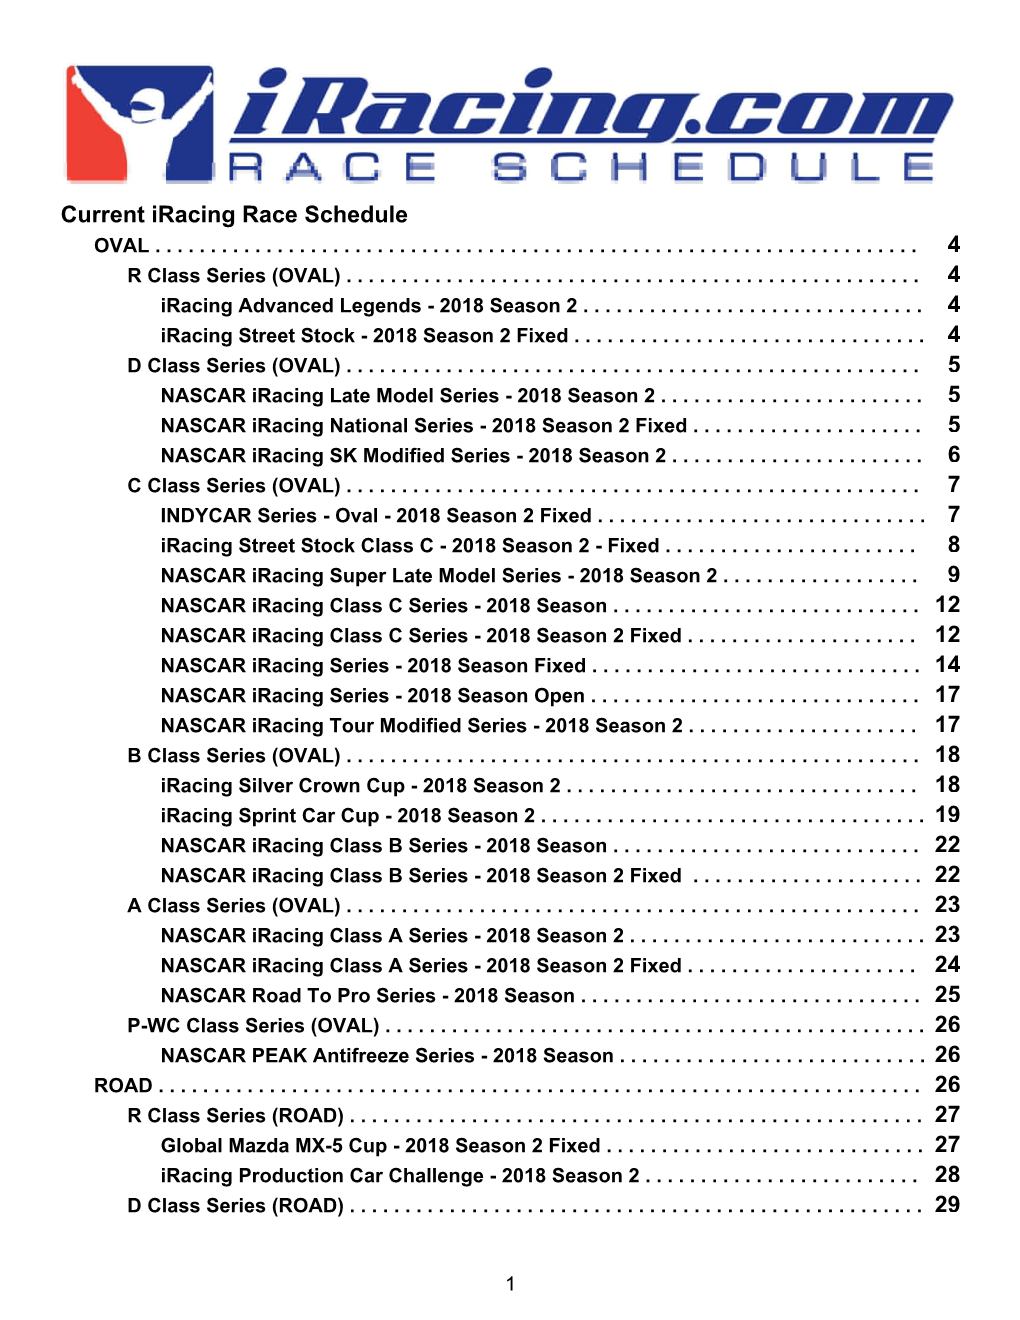 4 4 4 4 5 5 5 6 7 7 8 9 12 12 14 17 17 18 18 19 22 22 23 23 24 25 26 26 26 27 27 28 29 Current Iracing Race Schedule